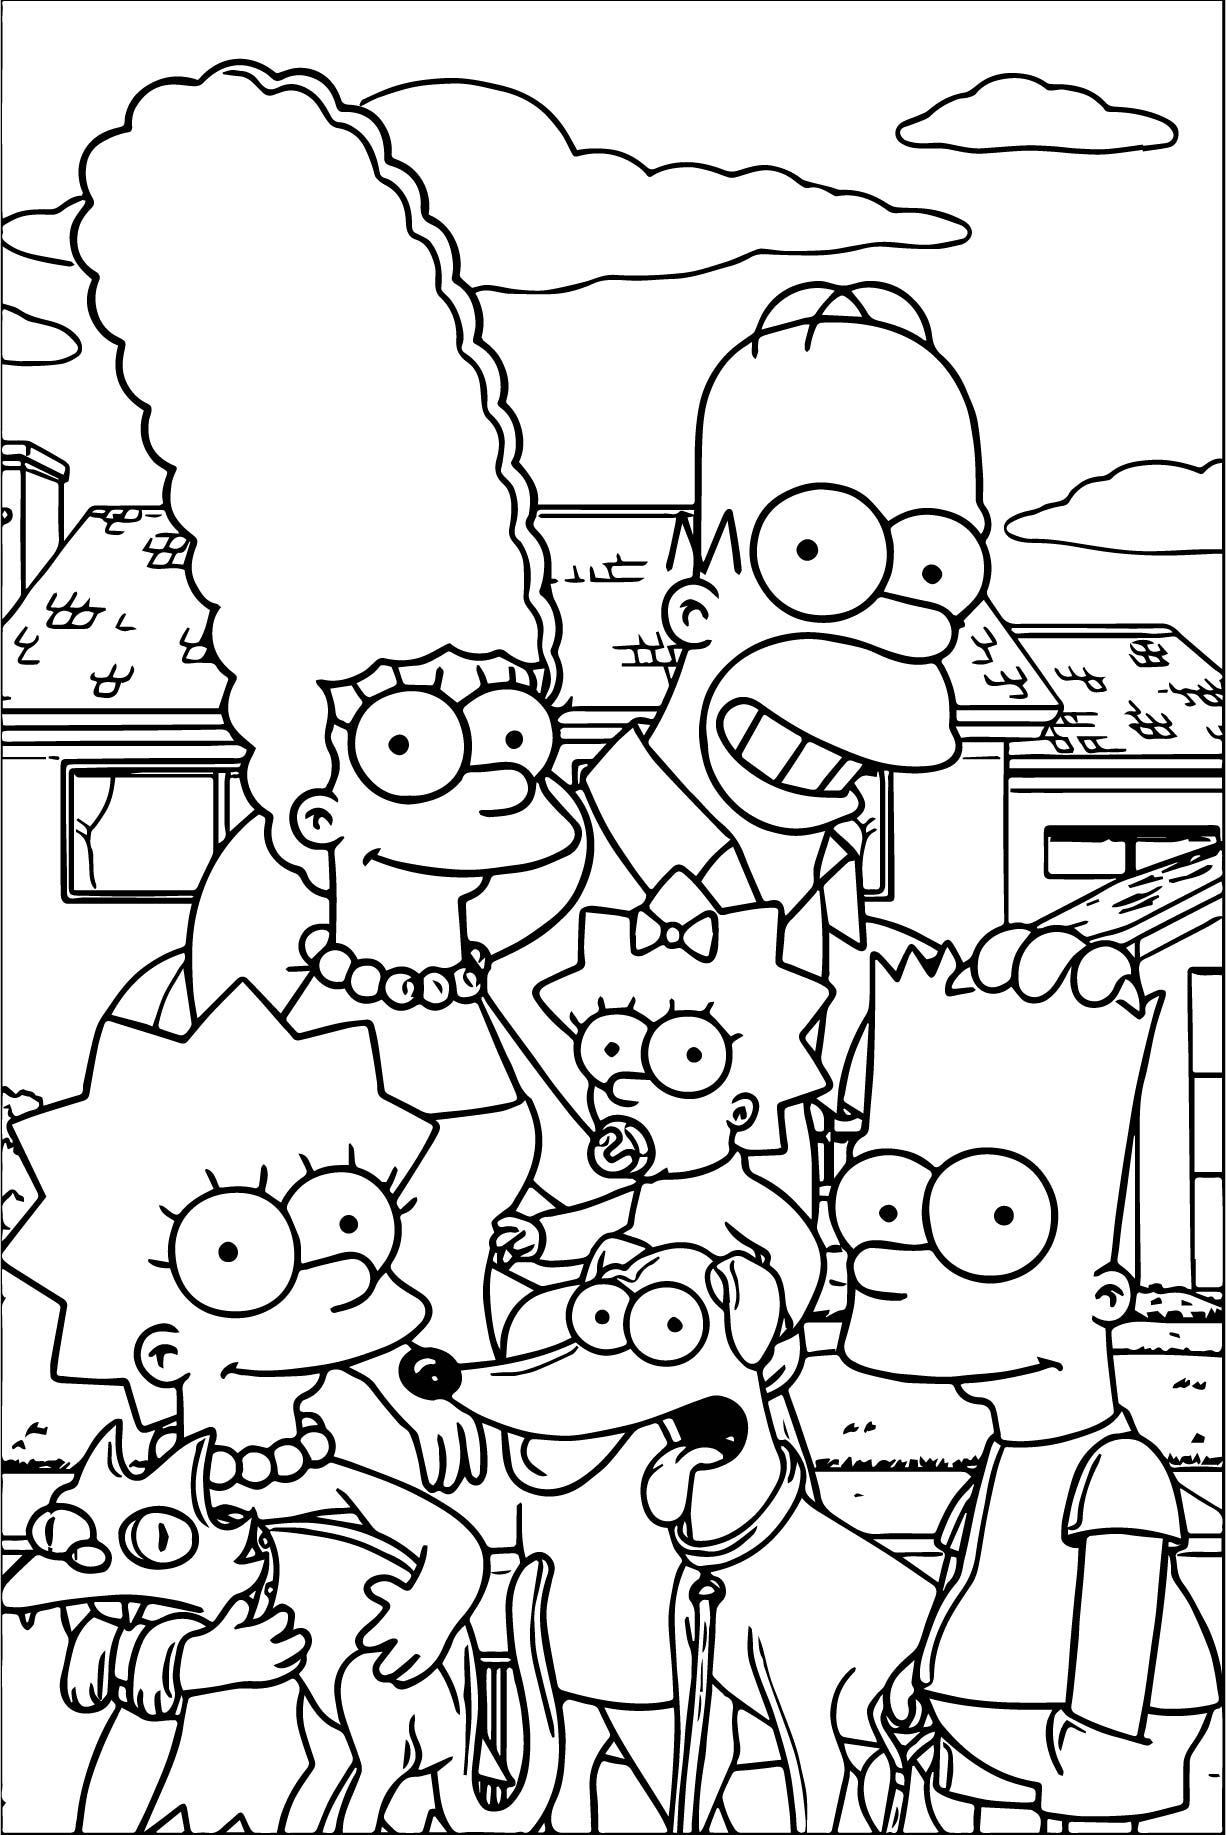 Simpsons Pic Coloring Page